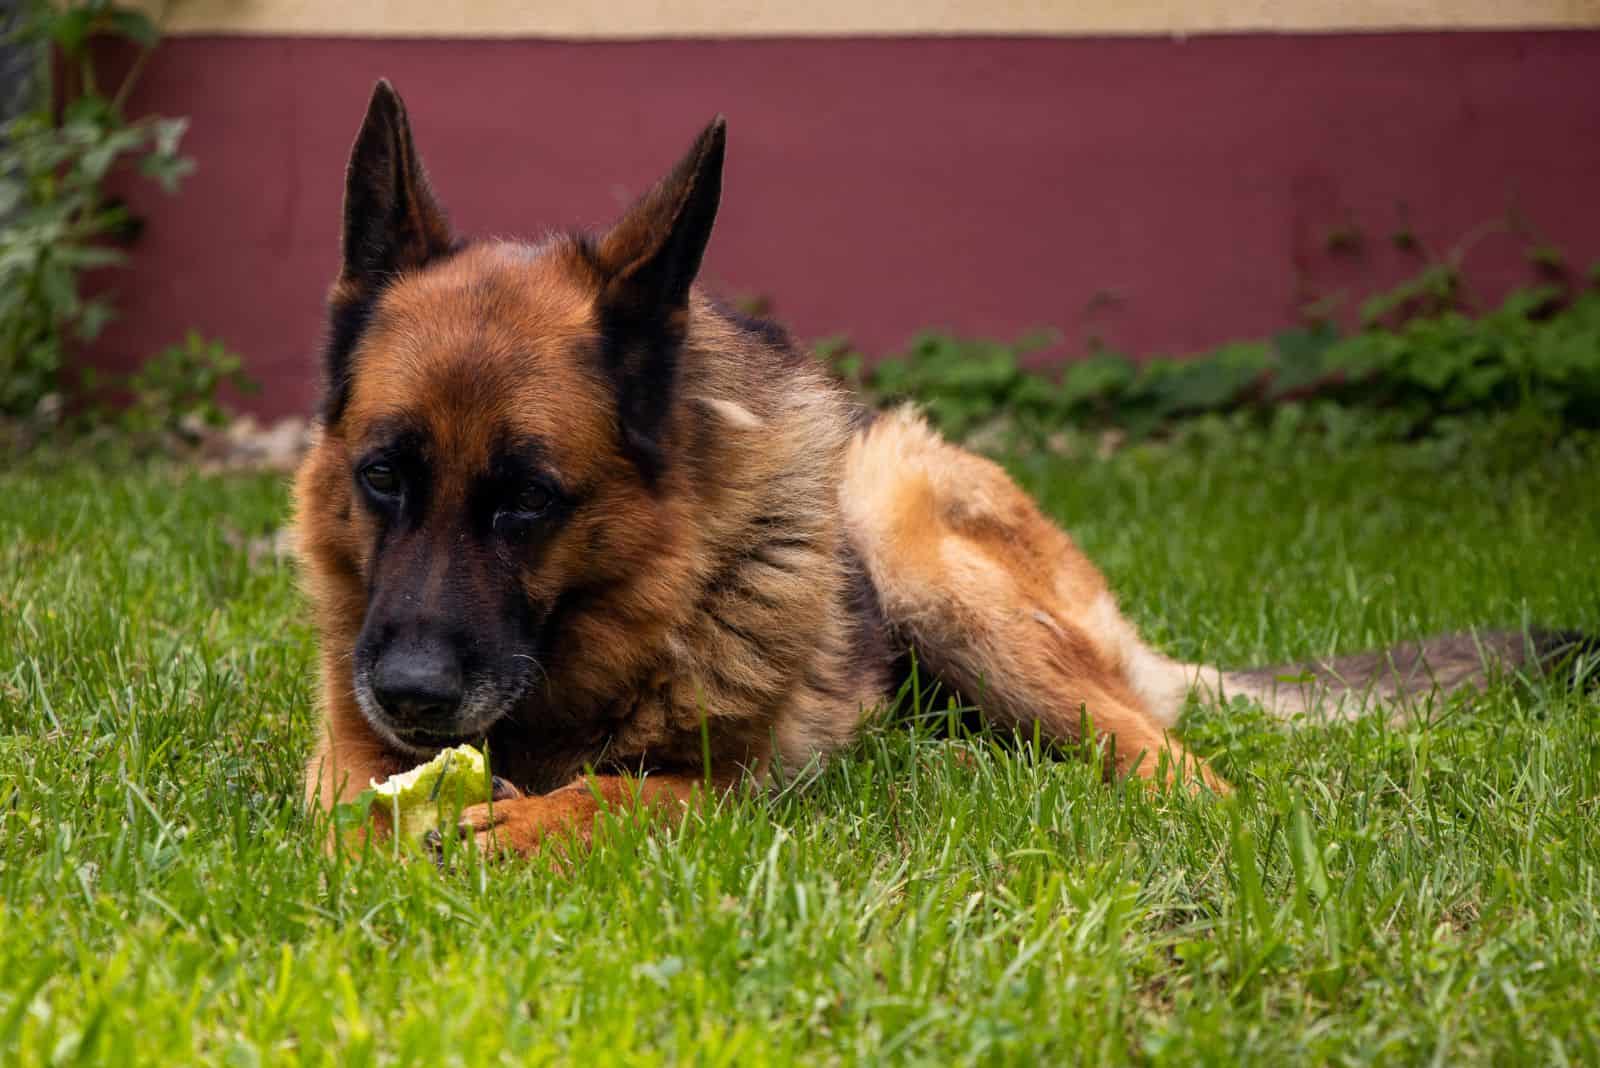 german shepherd lies on the grass and nibbles on the grass